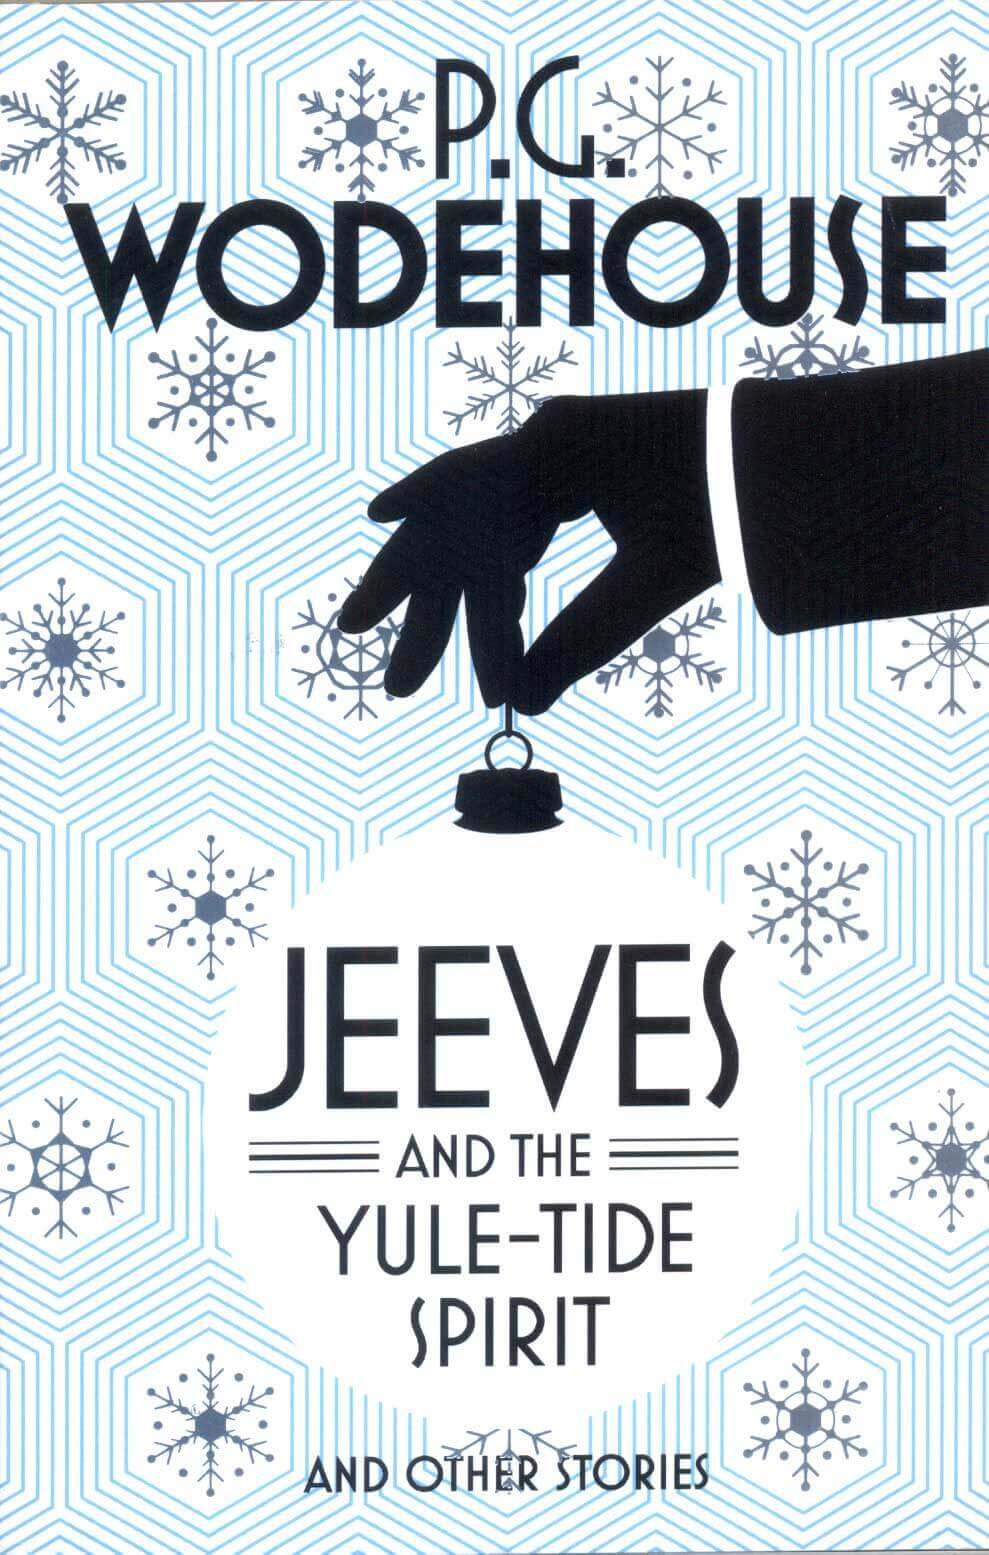 Jeeves and the Yule - Tide Spirit and Other Stories